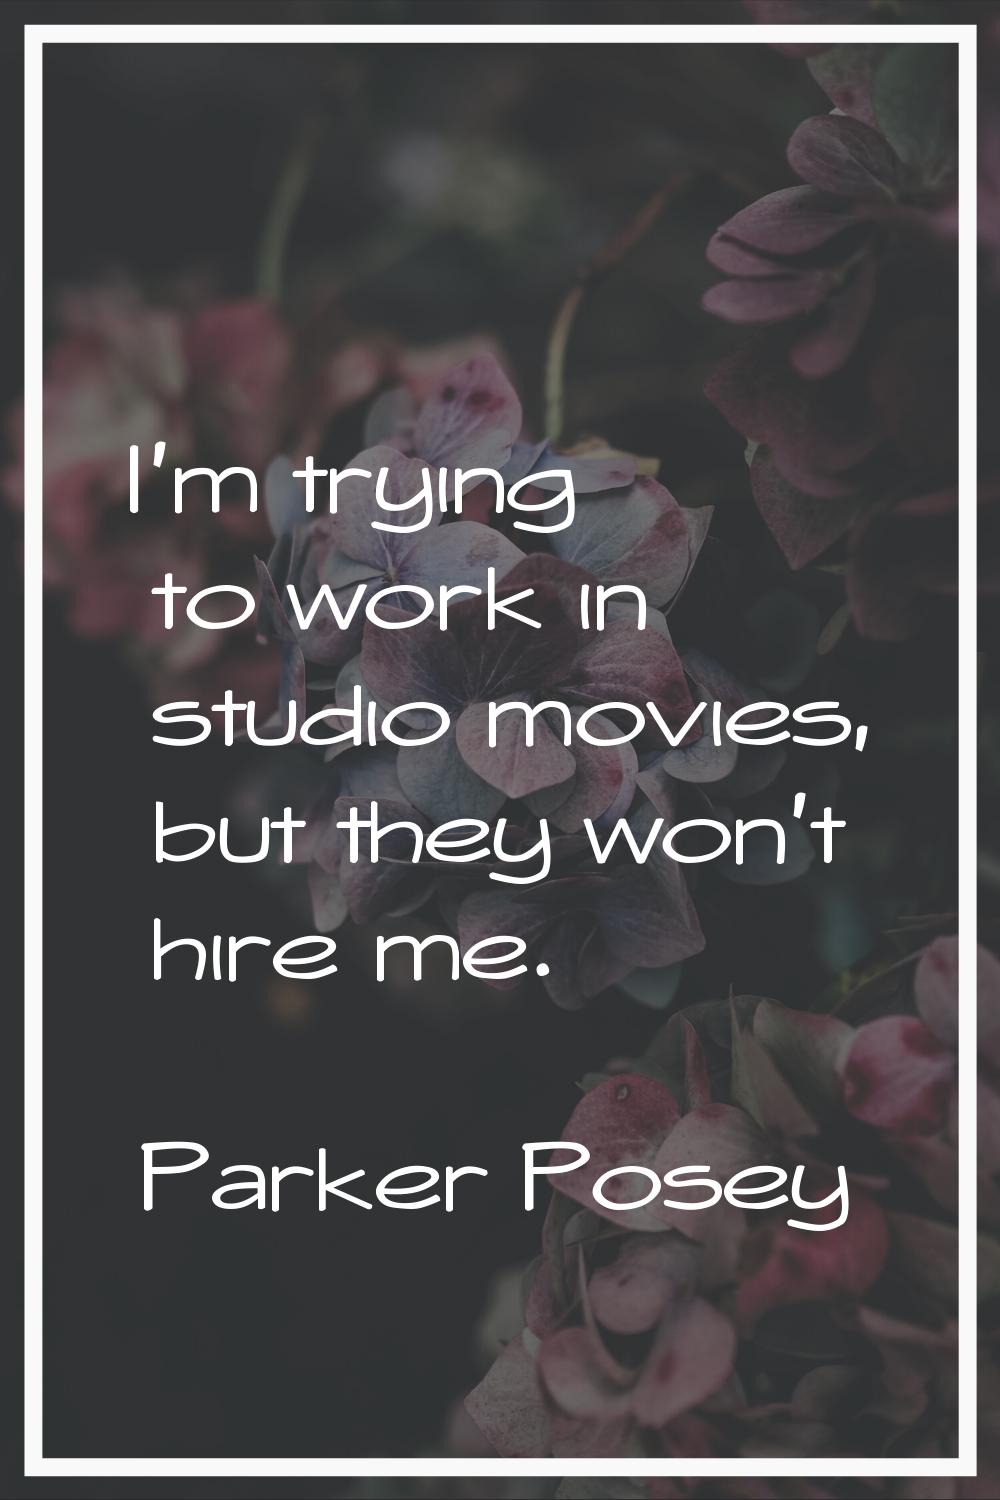 I'm trying to work in studio movies, but they won't hire me.